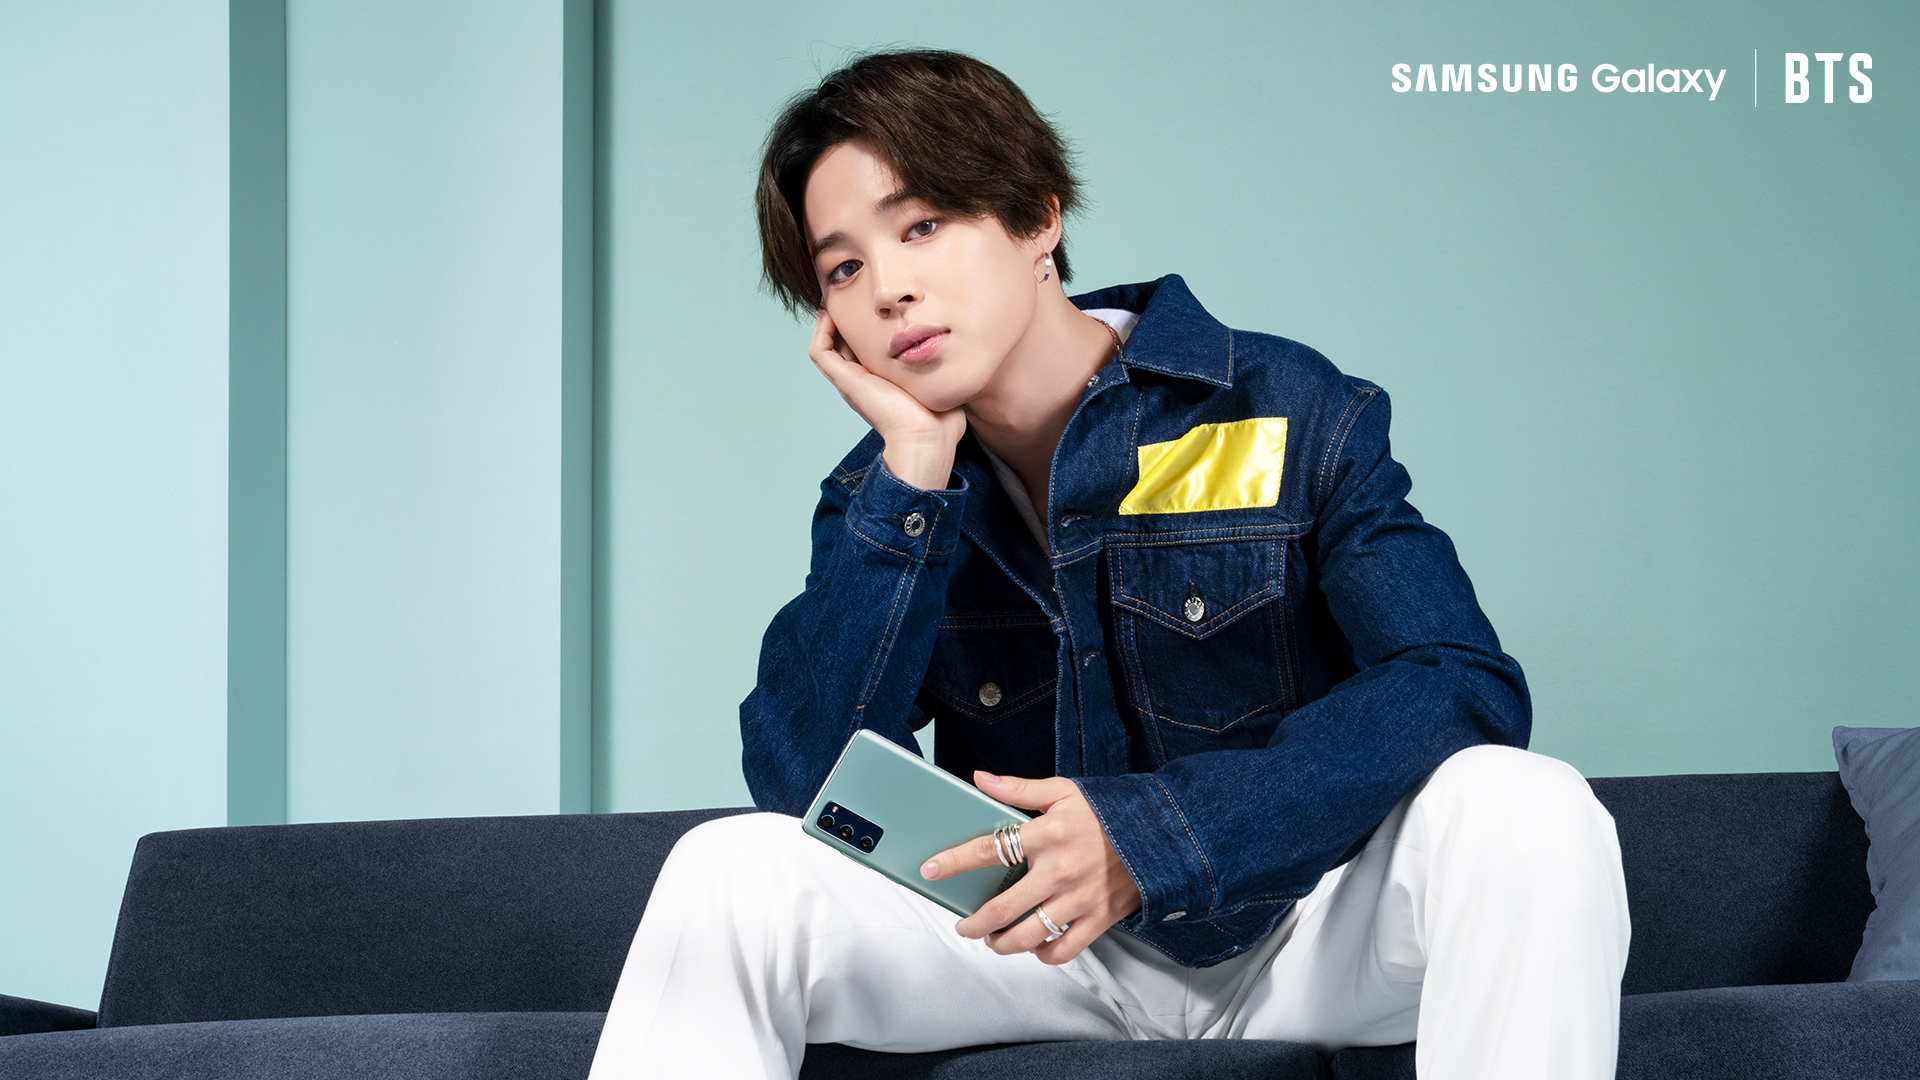 [Picture/Video] BTS – SAMSUNG Galaxy S20 FE